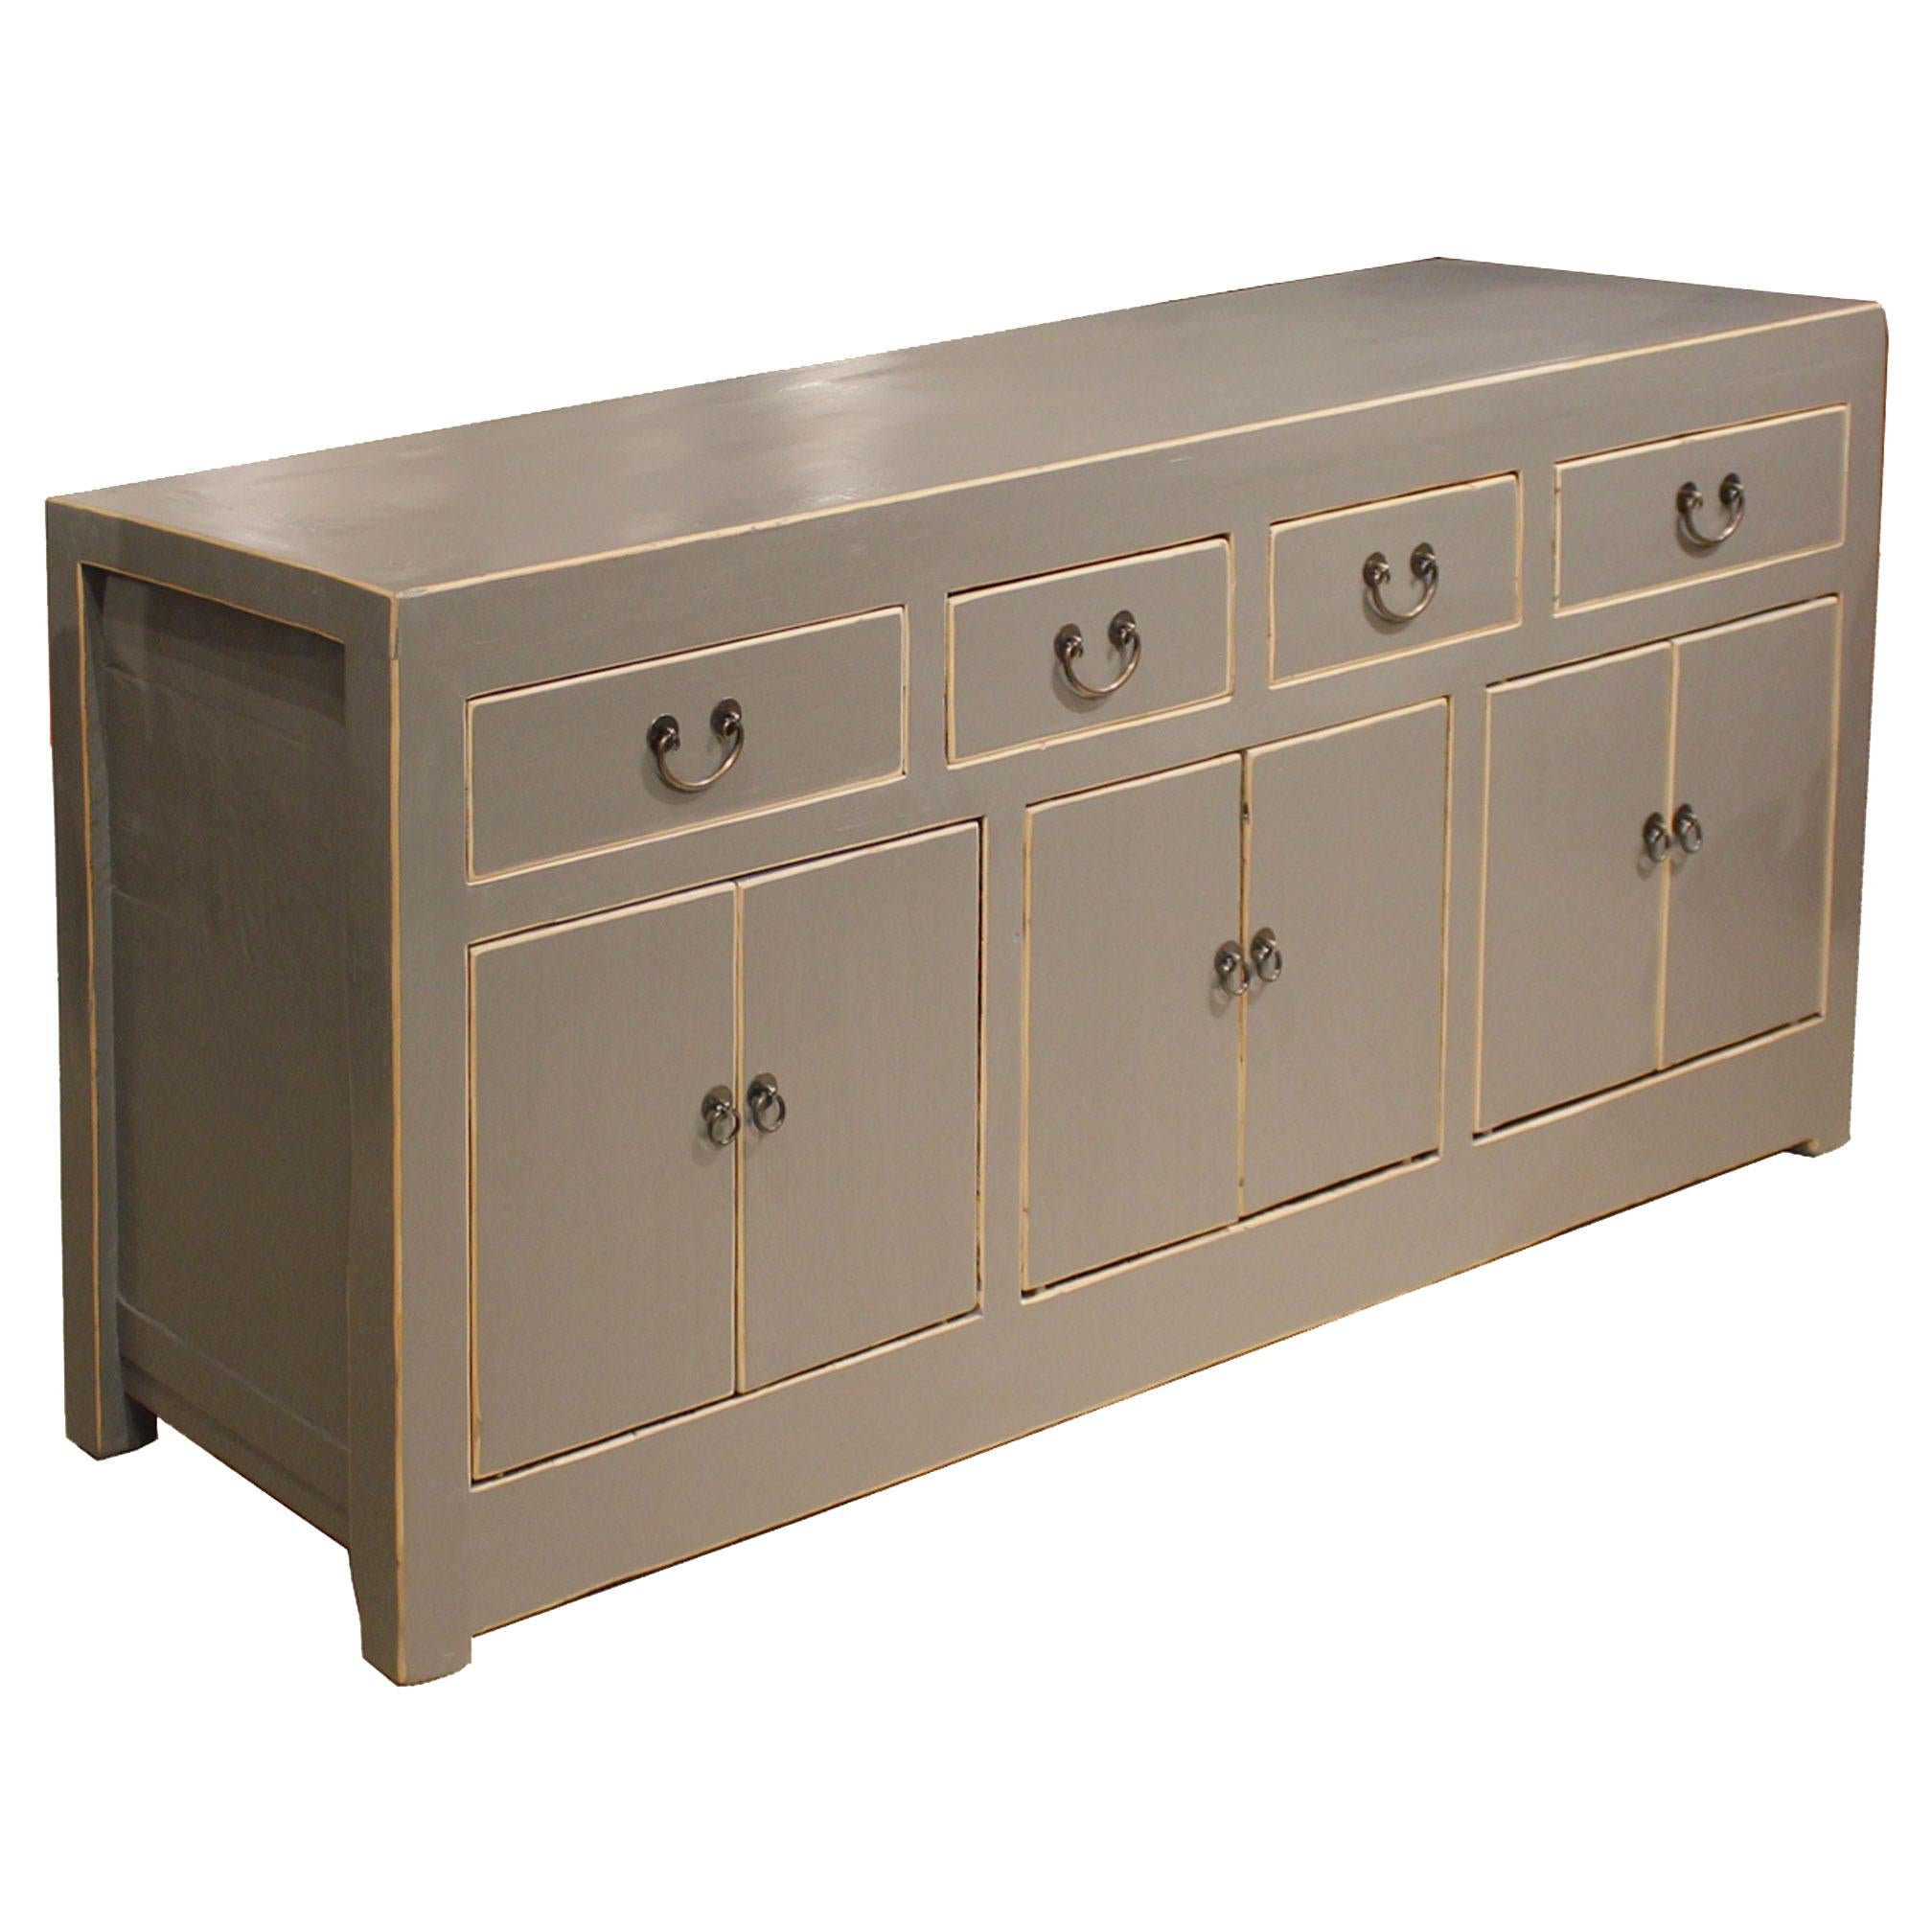 Contemporary solid wood gray lacquer sideboard with exposed wood edges. Can be used behind a sofa or in the dining room as a server.